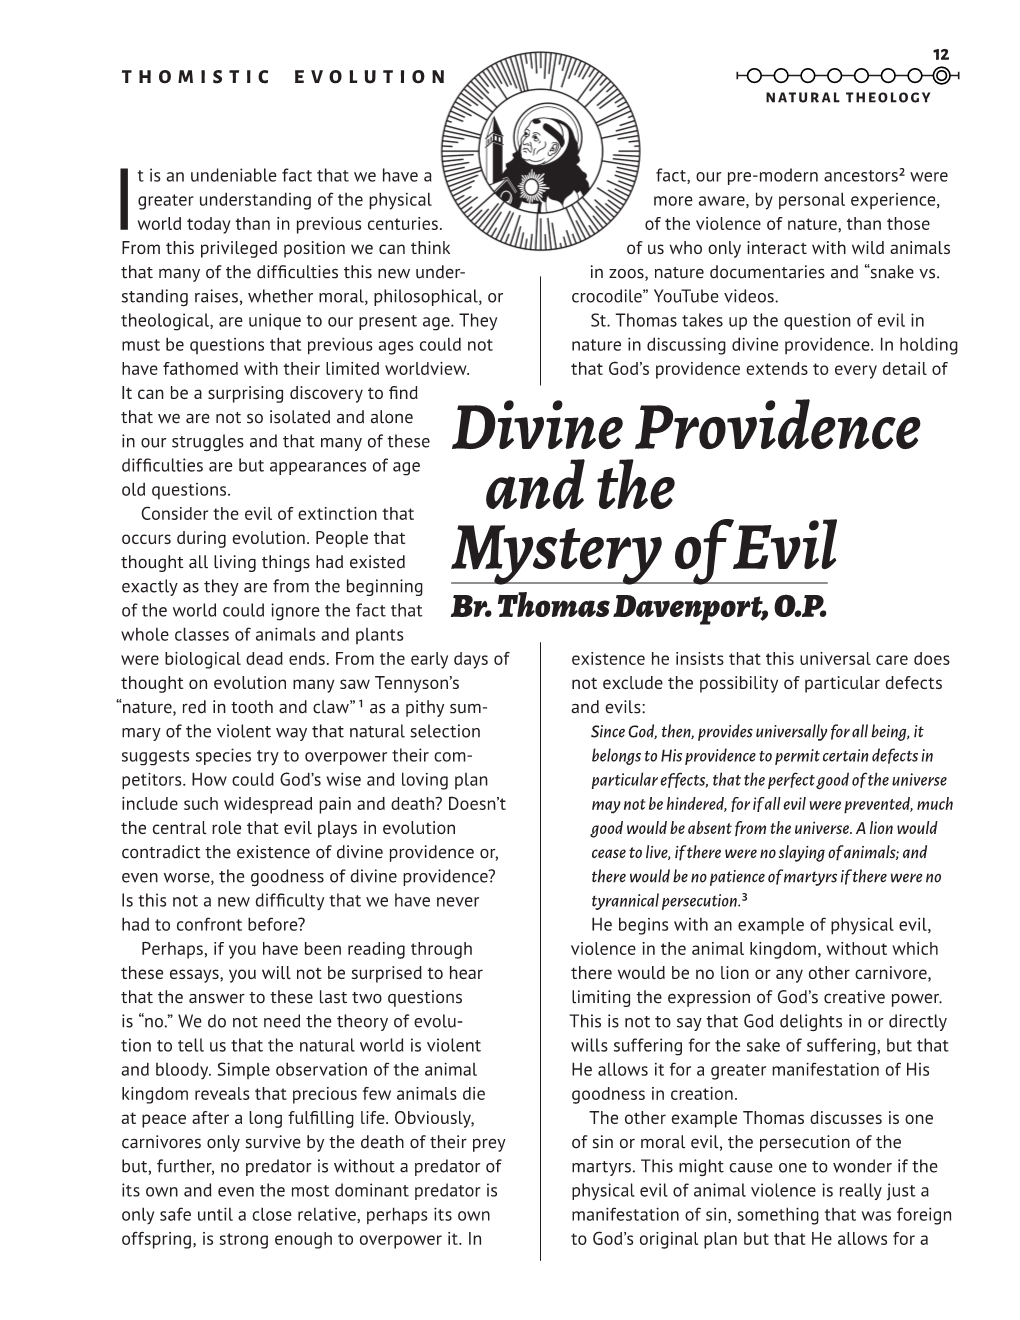 Divine Providence and the Mystery of Evil